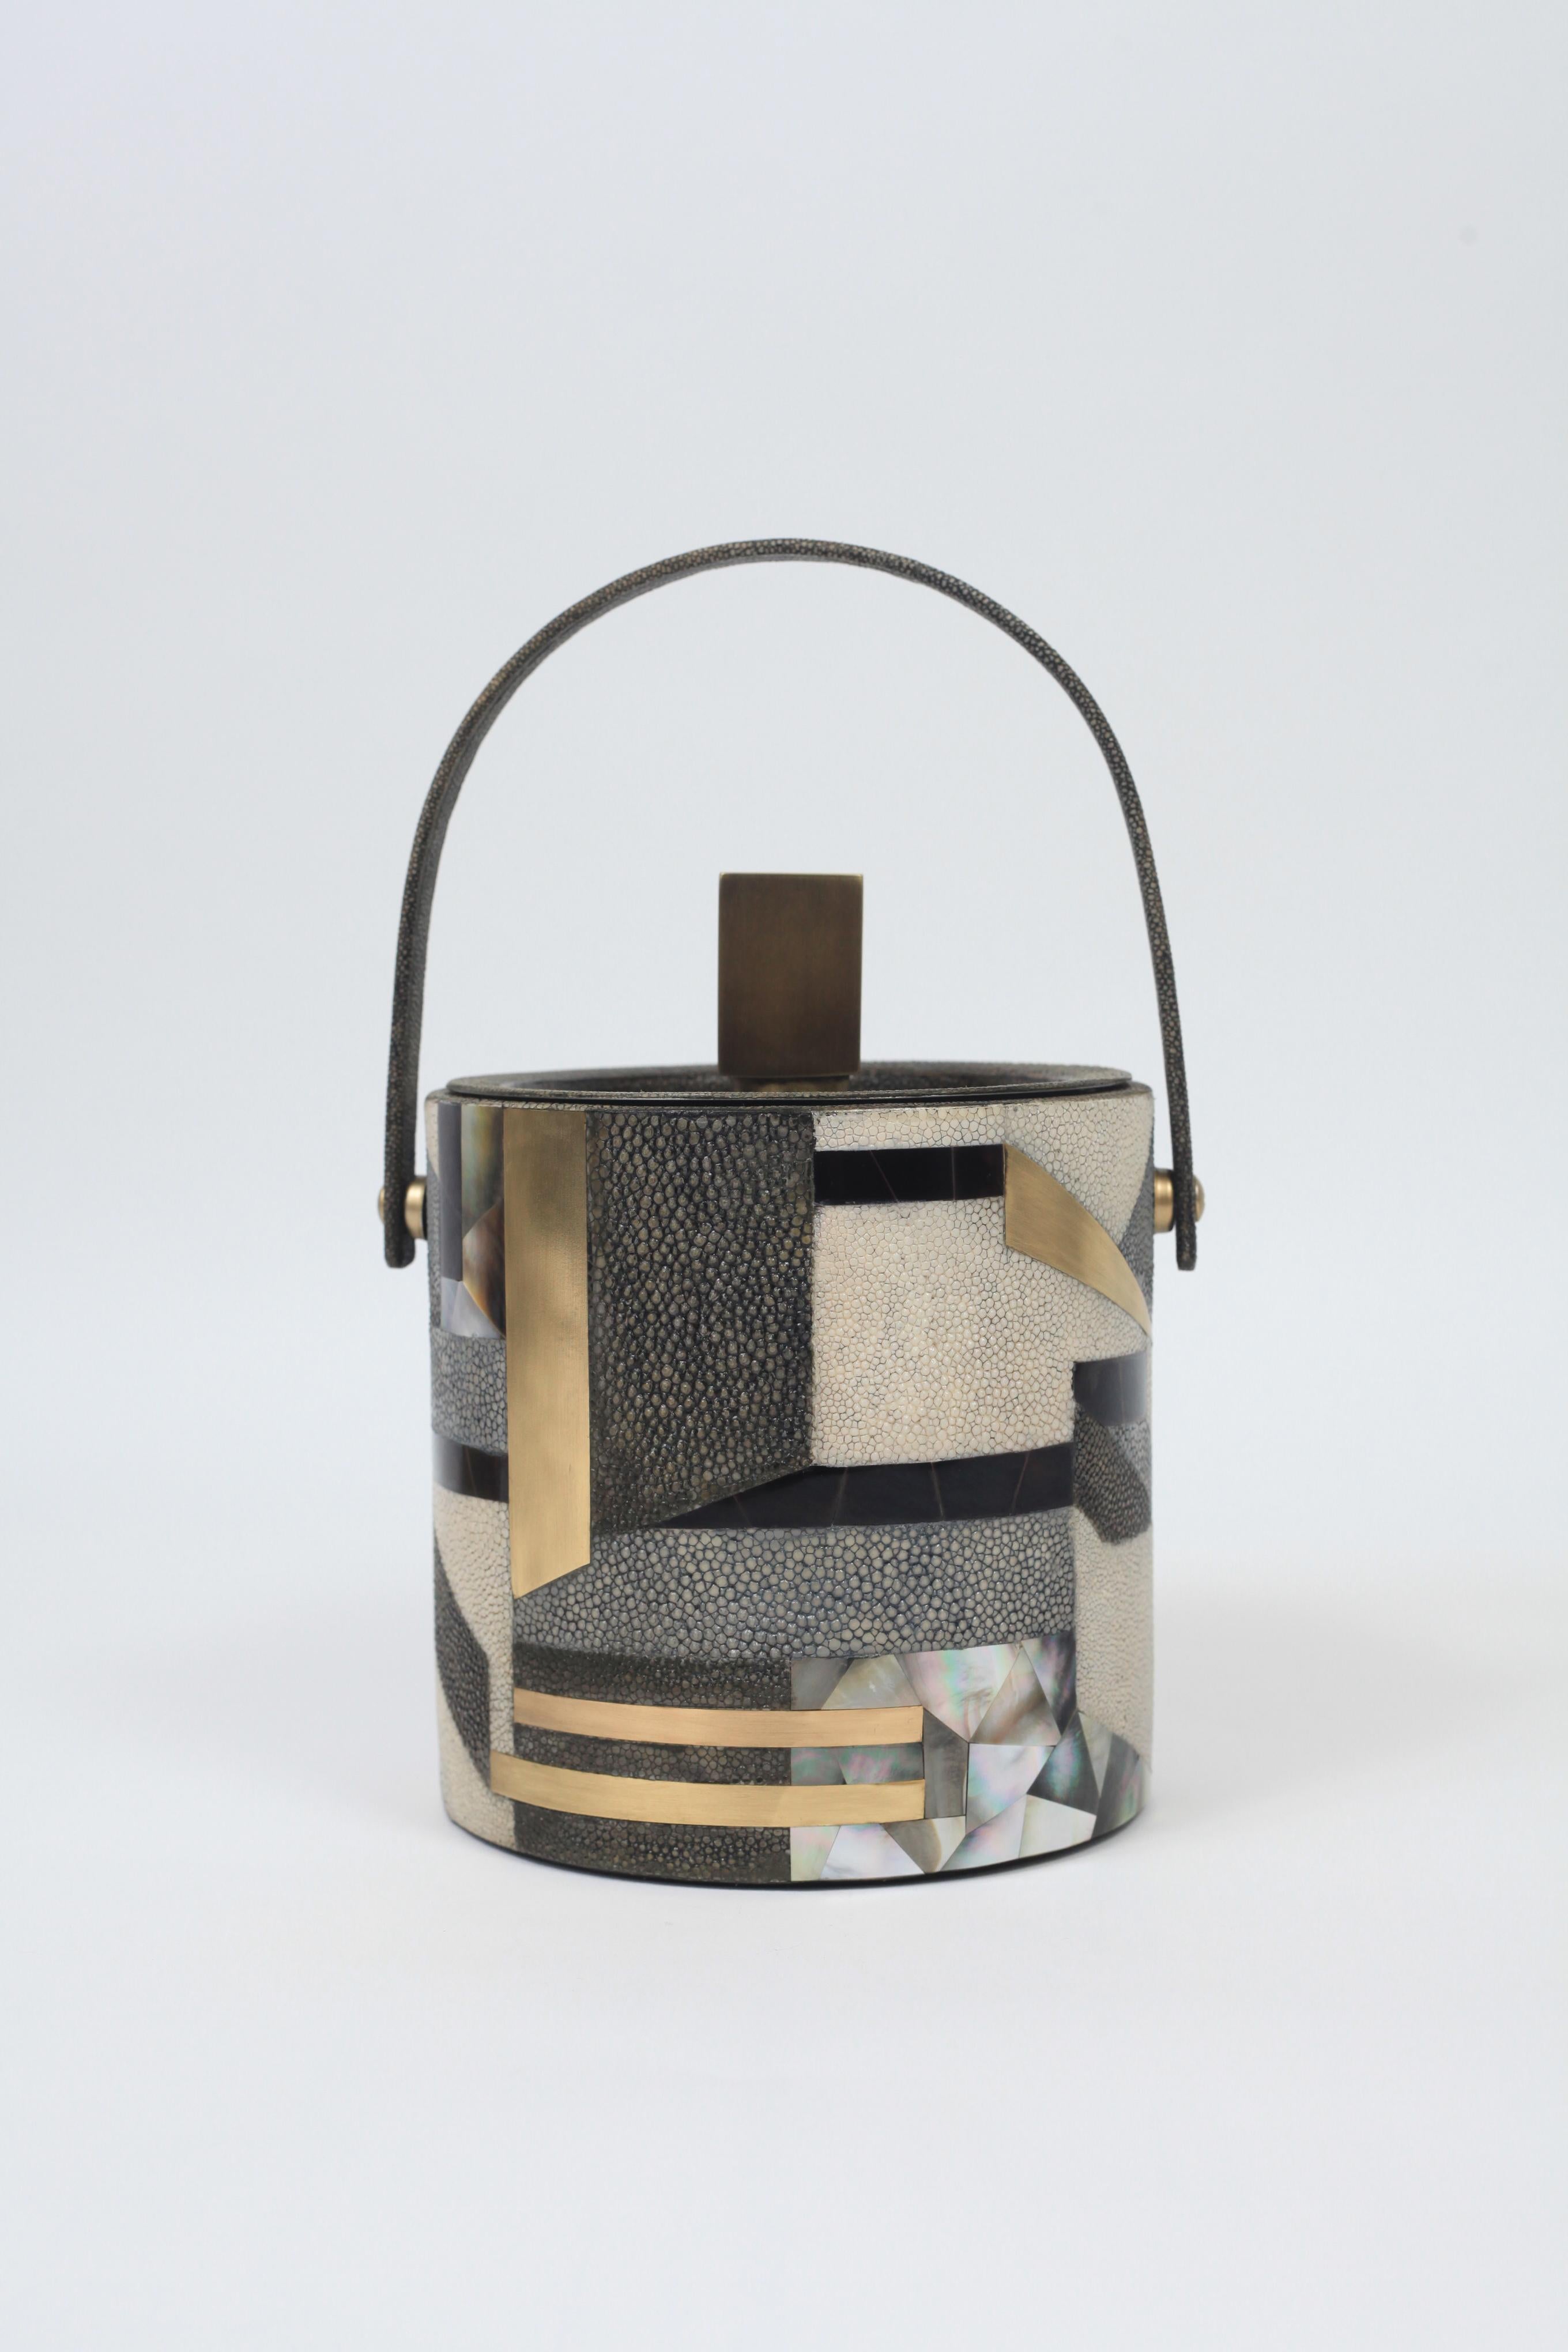 The KIFU PARIS Ice Bucket is the ultimate luxury bar accessory, inlaid in a mixture of shagreen shell and brass to create a bold geometric pattern. This piece comes with an ice thong. Also available in plain shagreen and plain shell, see images at